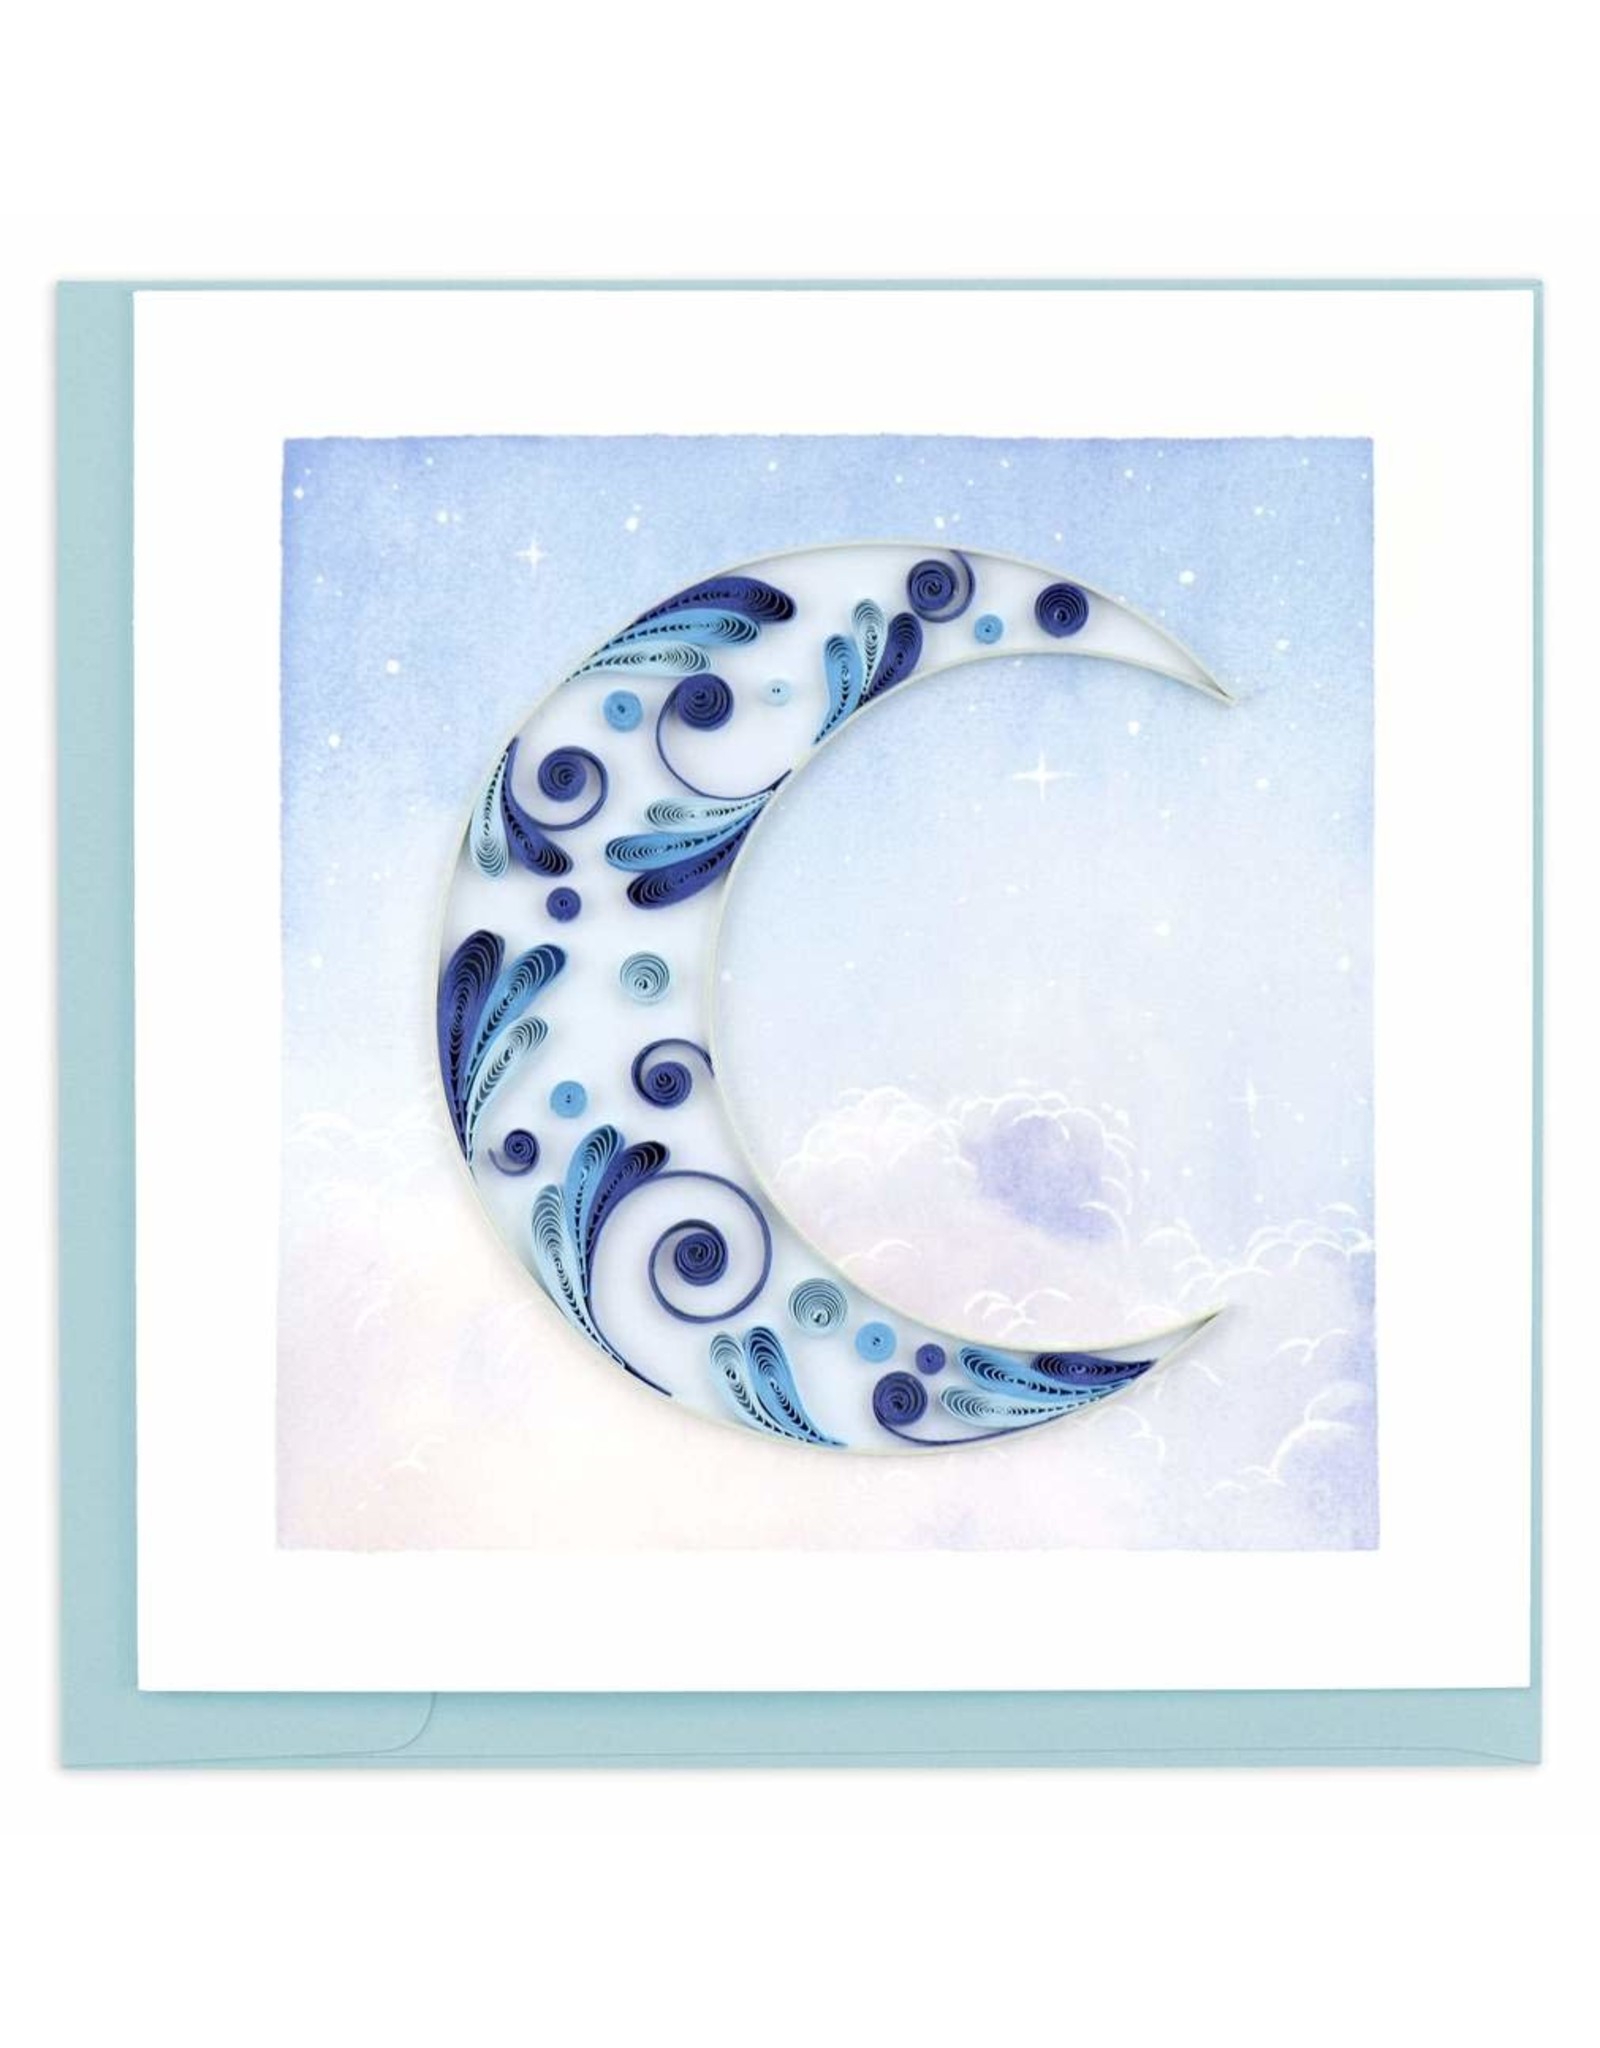 quillingcard Quilled Crescent Moon Card, Vietnam